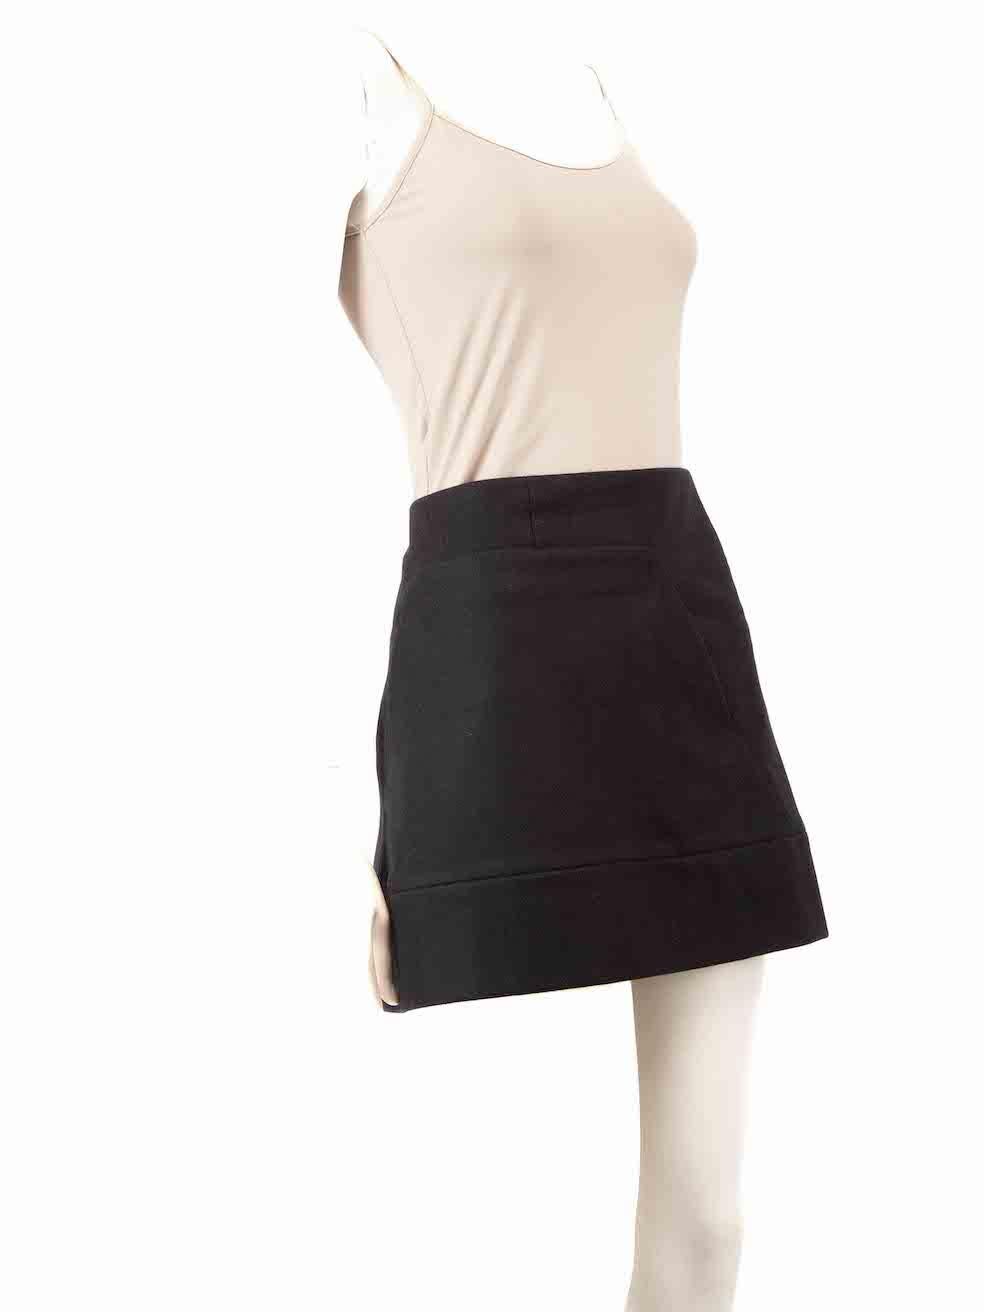 CONDITION is Very good. Hardly any visible wear to skirt is evident on this used Miu Miu designer resale item.
 
 
 
 Details
 
 
 Black
 
 Wool
 
 Skirt
 
 Mini
 
 A-Line
 
 2x Front pockets
 
 Back zip fastening
 
 
 
 
 
 Made in Italy
 
 
 
